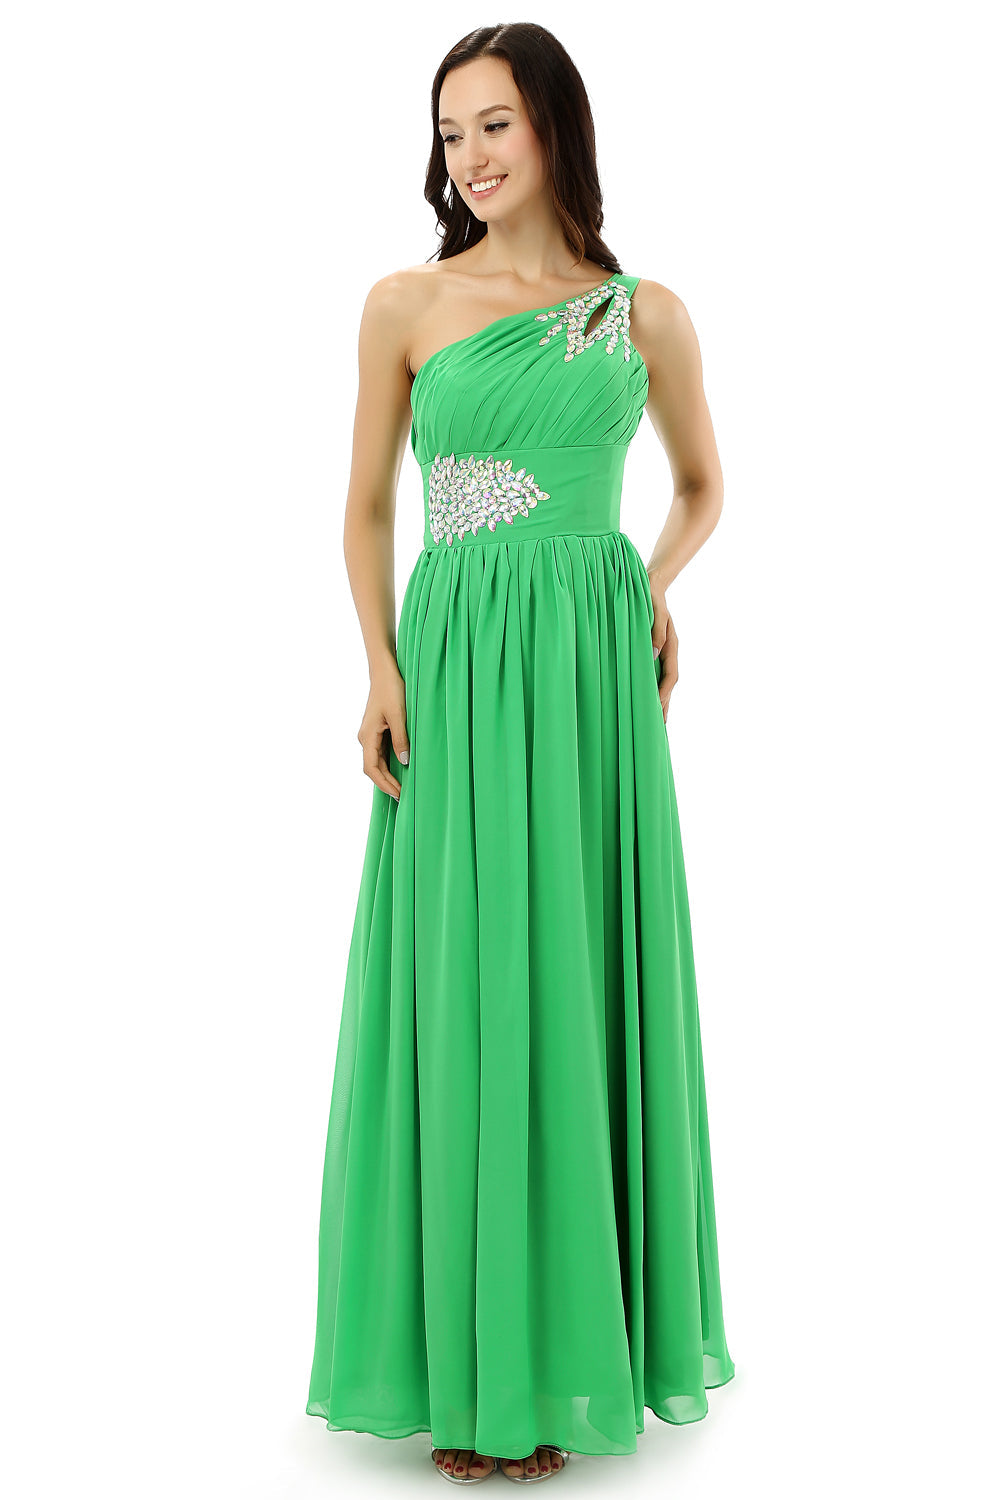 Green One Shoulder Chiffon With Crystal Pleats Corset Bridesmaid Dresses outfit, Party Dress Design